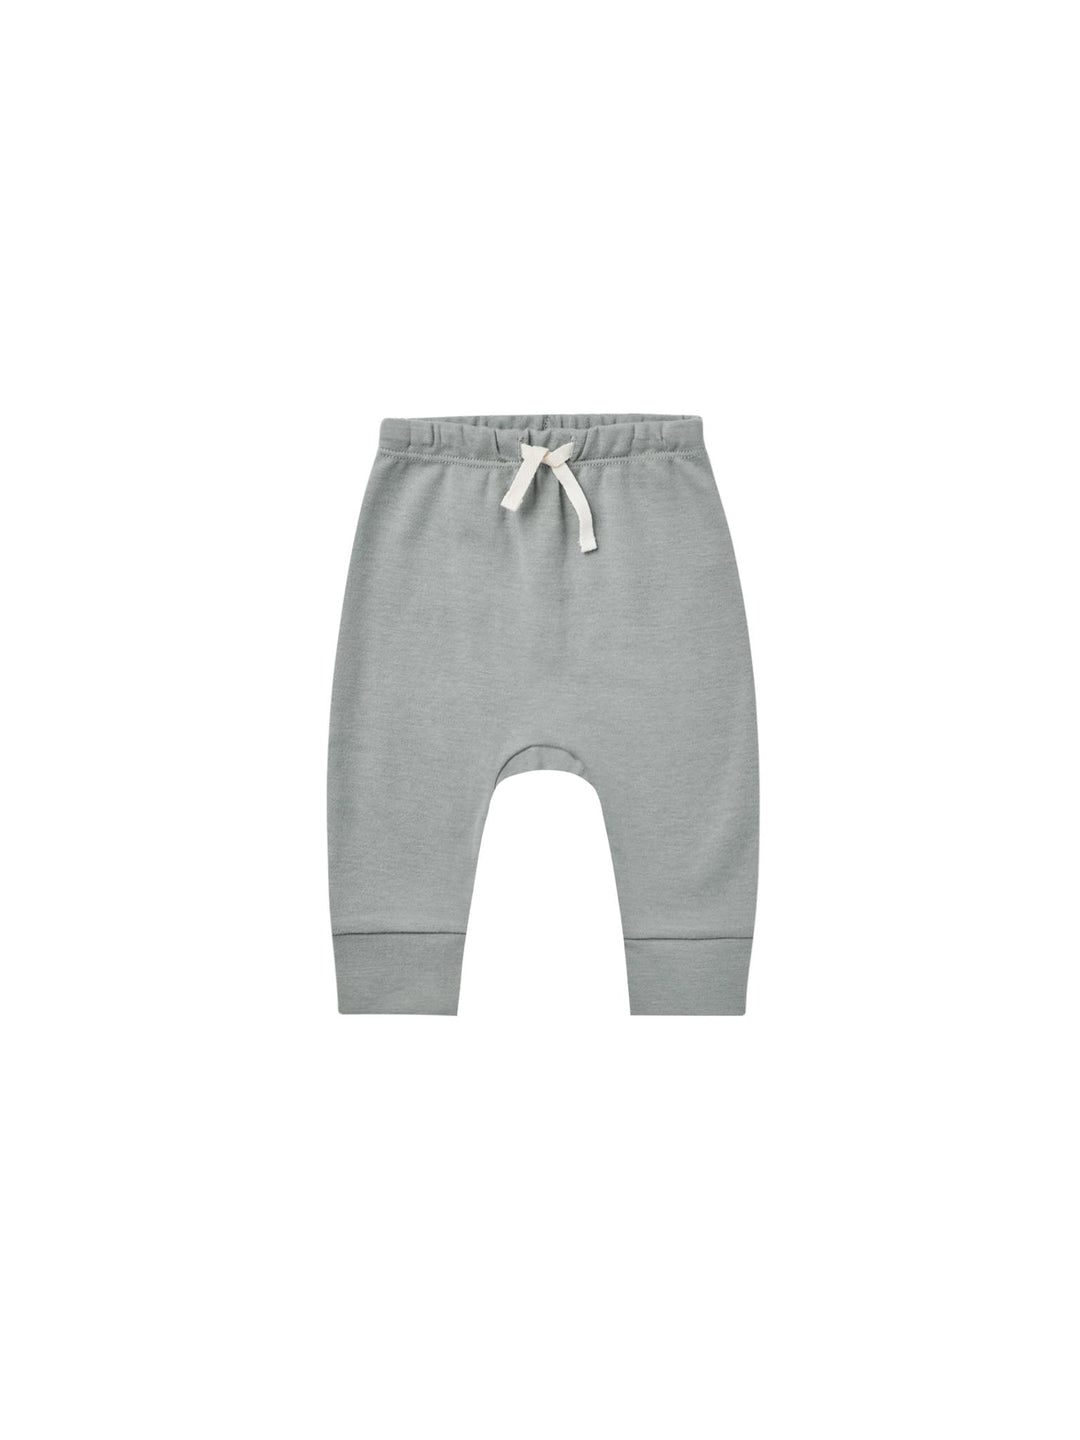 Quincy Mae Baby & Toddler Bottoms Drawstring Pant - Dusty Blue